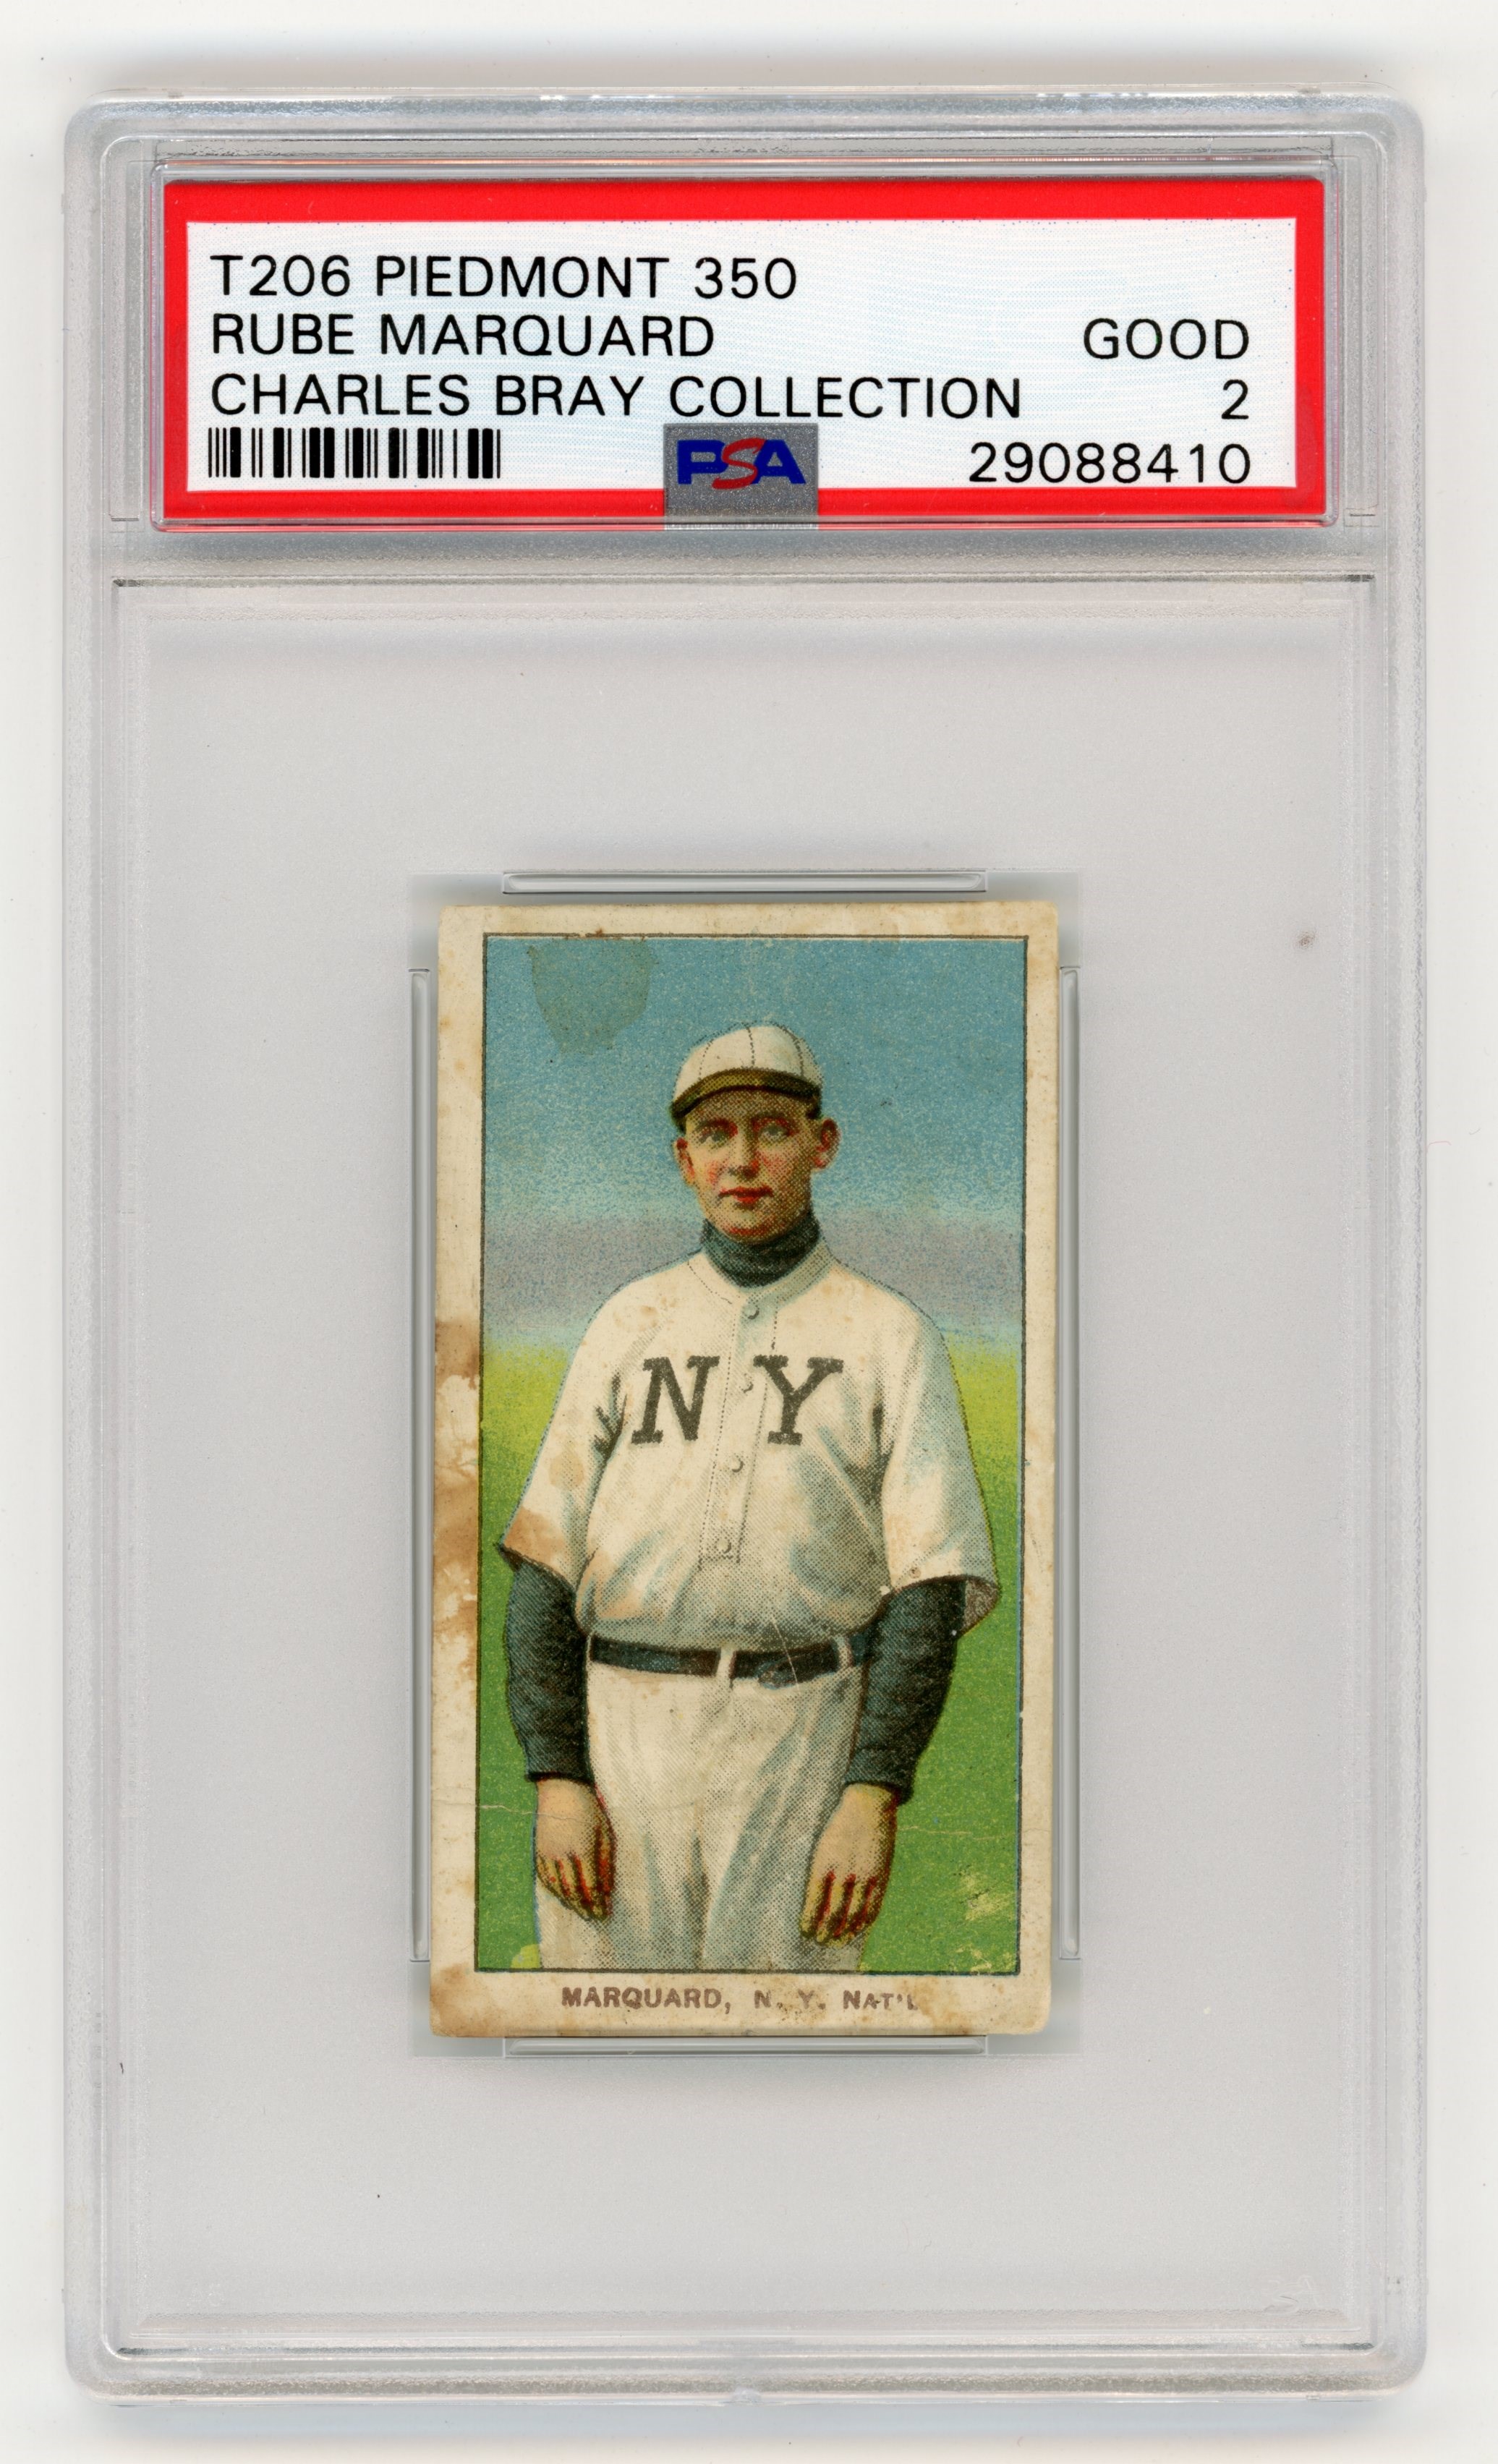 T206 Piedmont 350 Rube Marquard PSA 2 From Charles Bray Collection